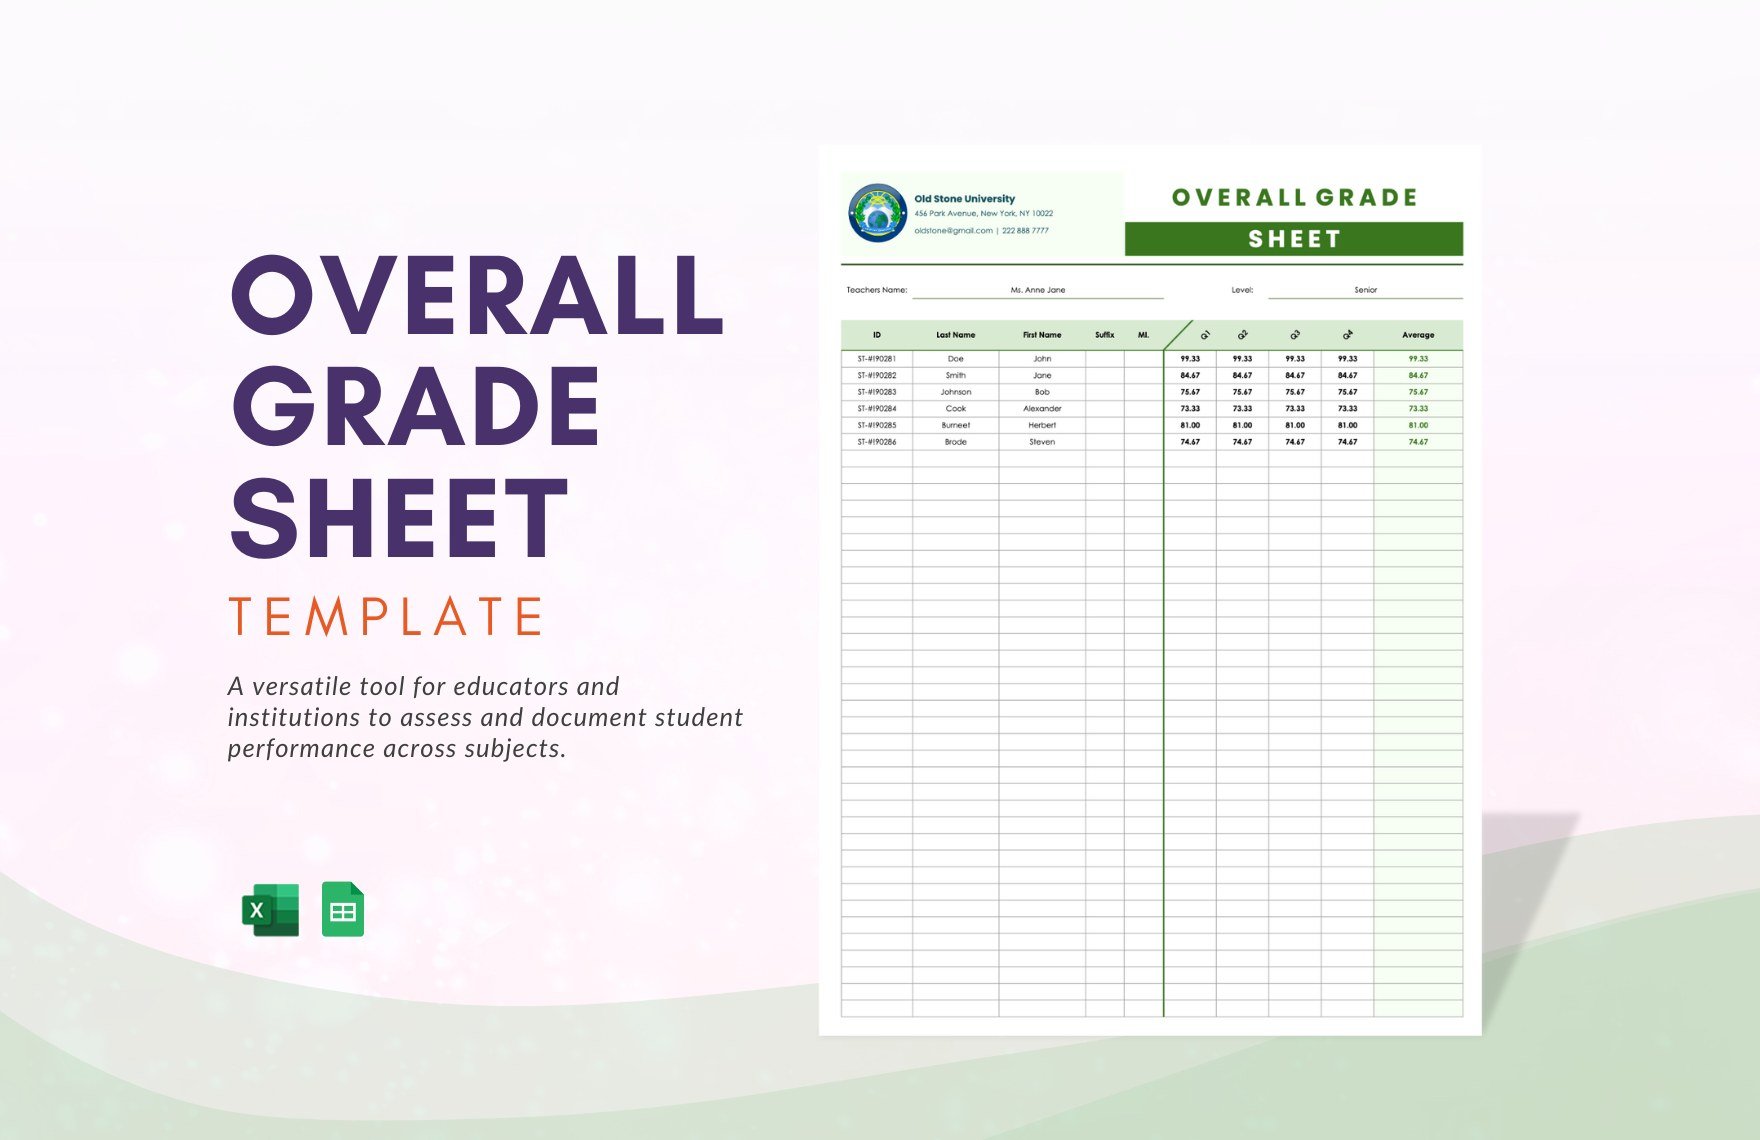 Overall Grade Sheet Template in Excel, Google Sheets